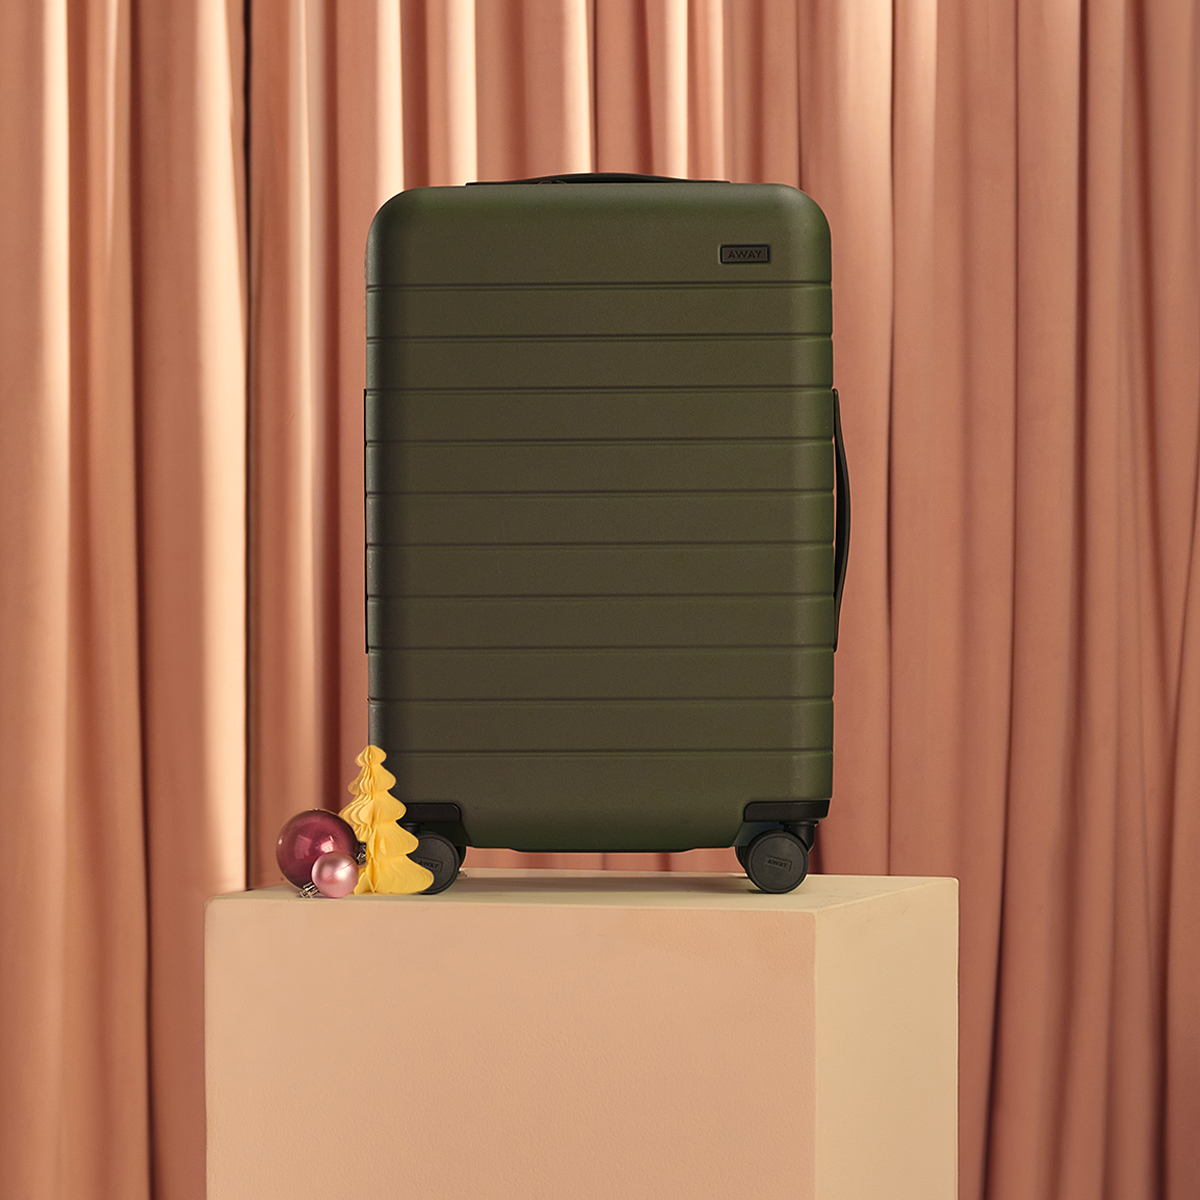 Away Just Launched Its Most Colorful Luggage Collection for a Limited Time